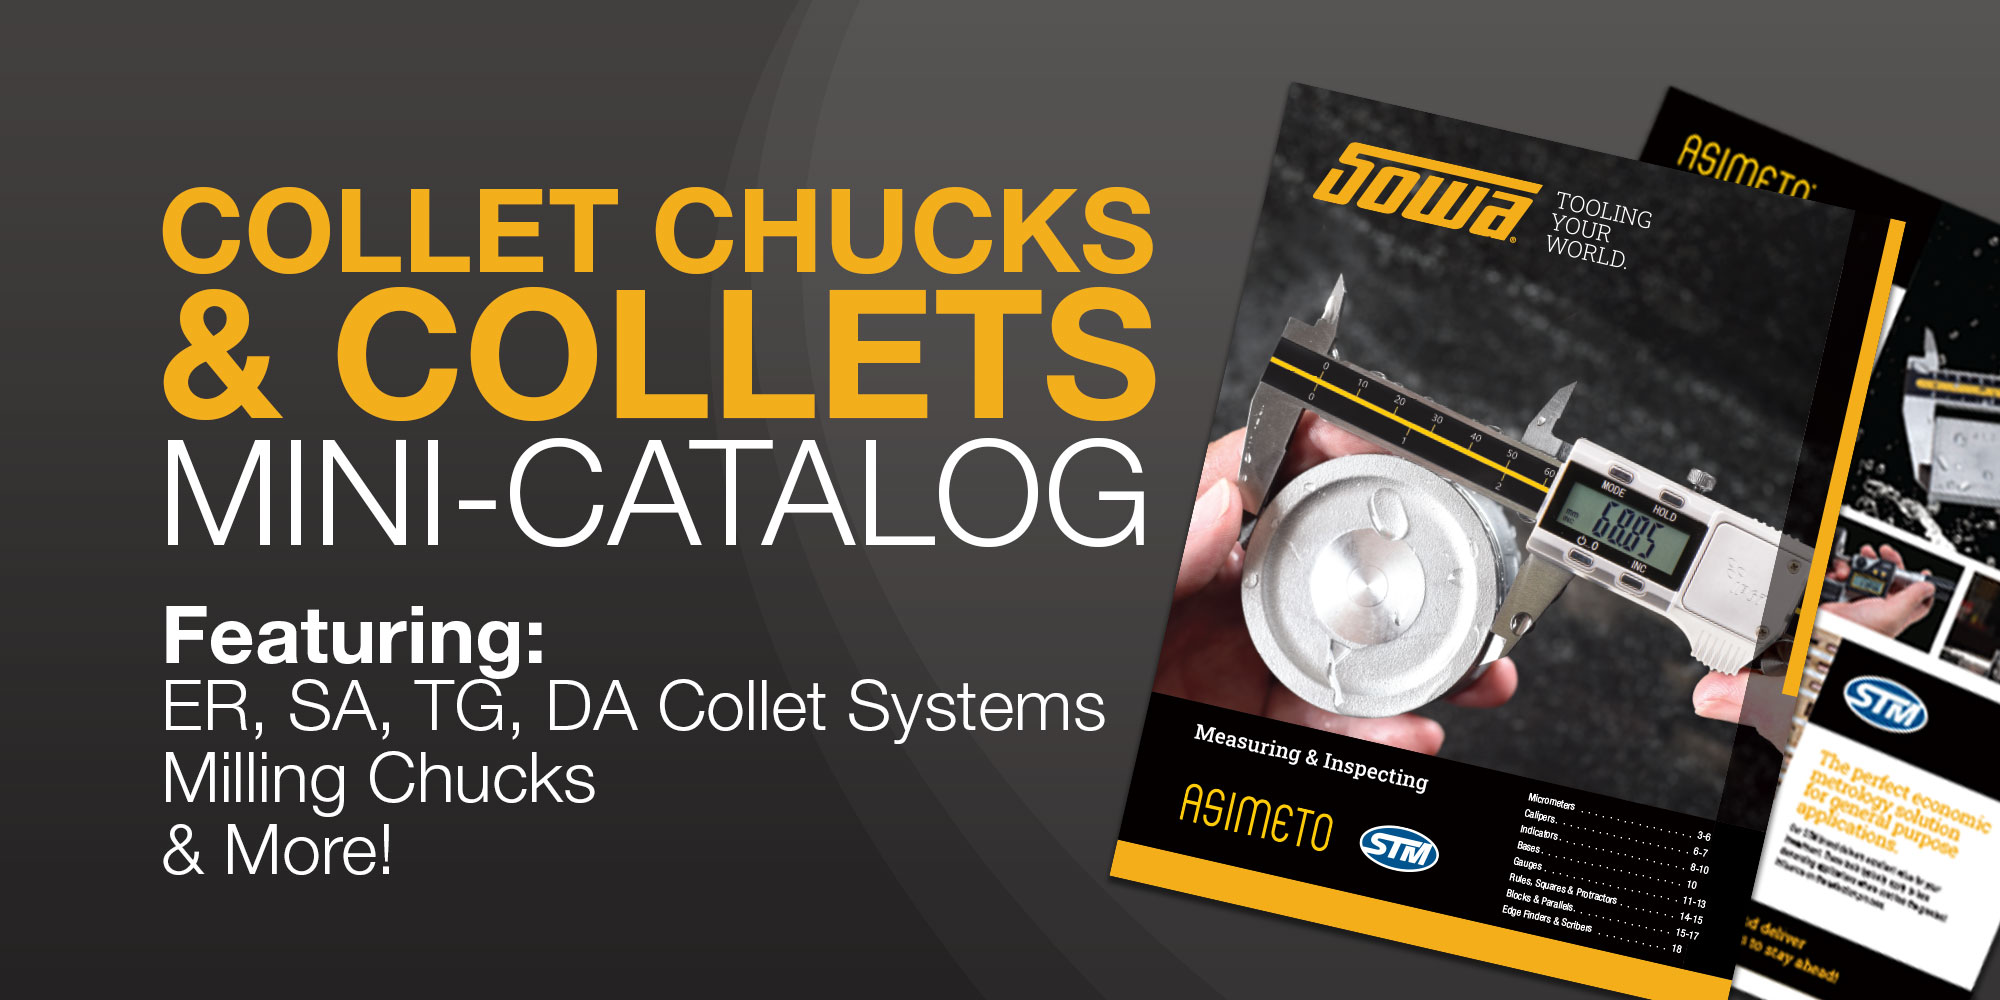 New Sowa Tool Collet Chuck & Collet Mini-Catalog